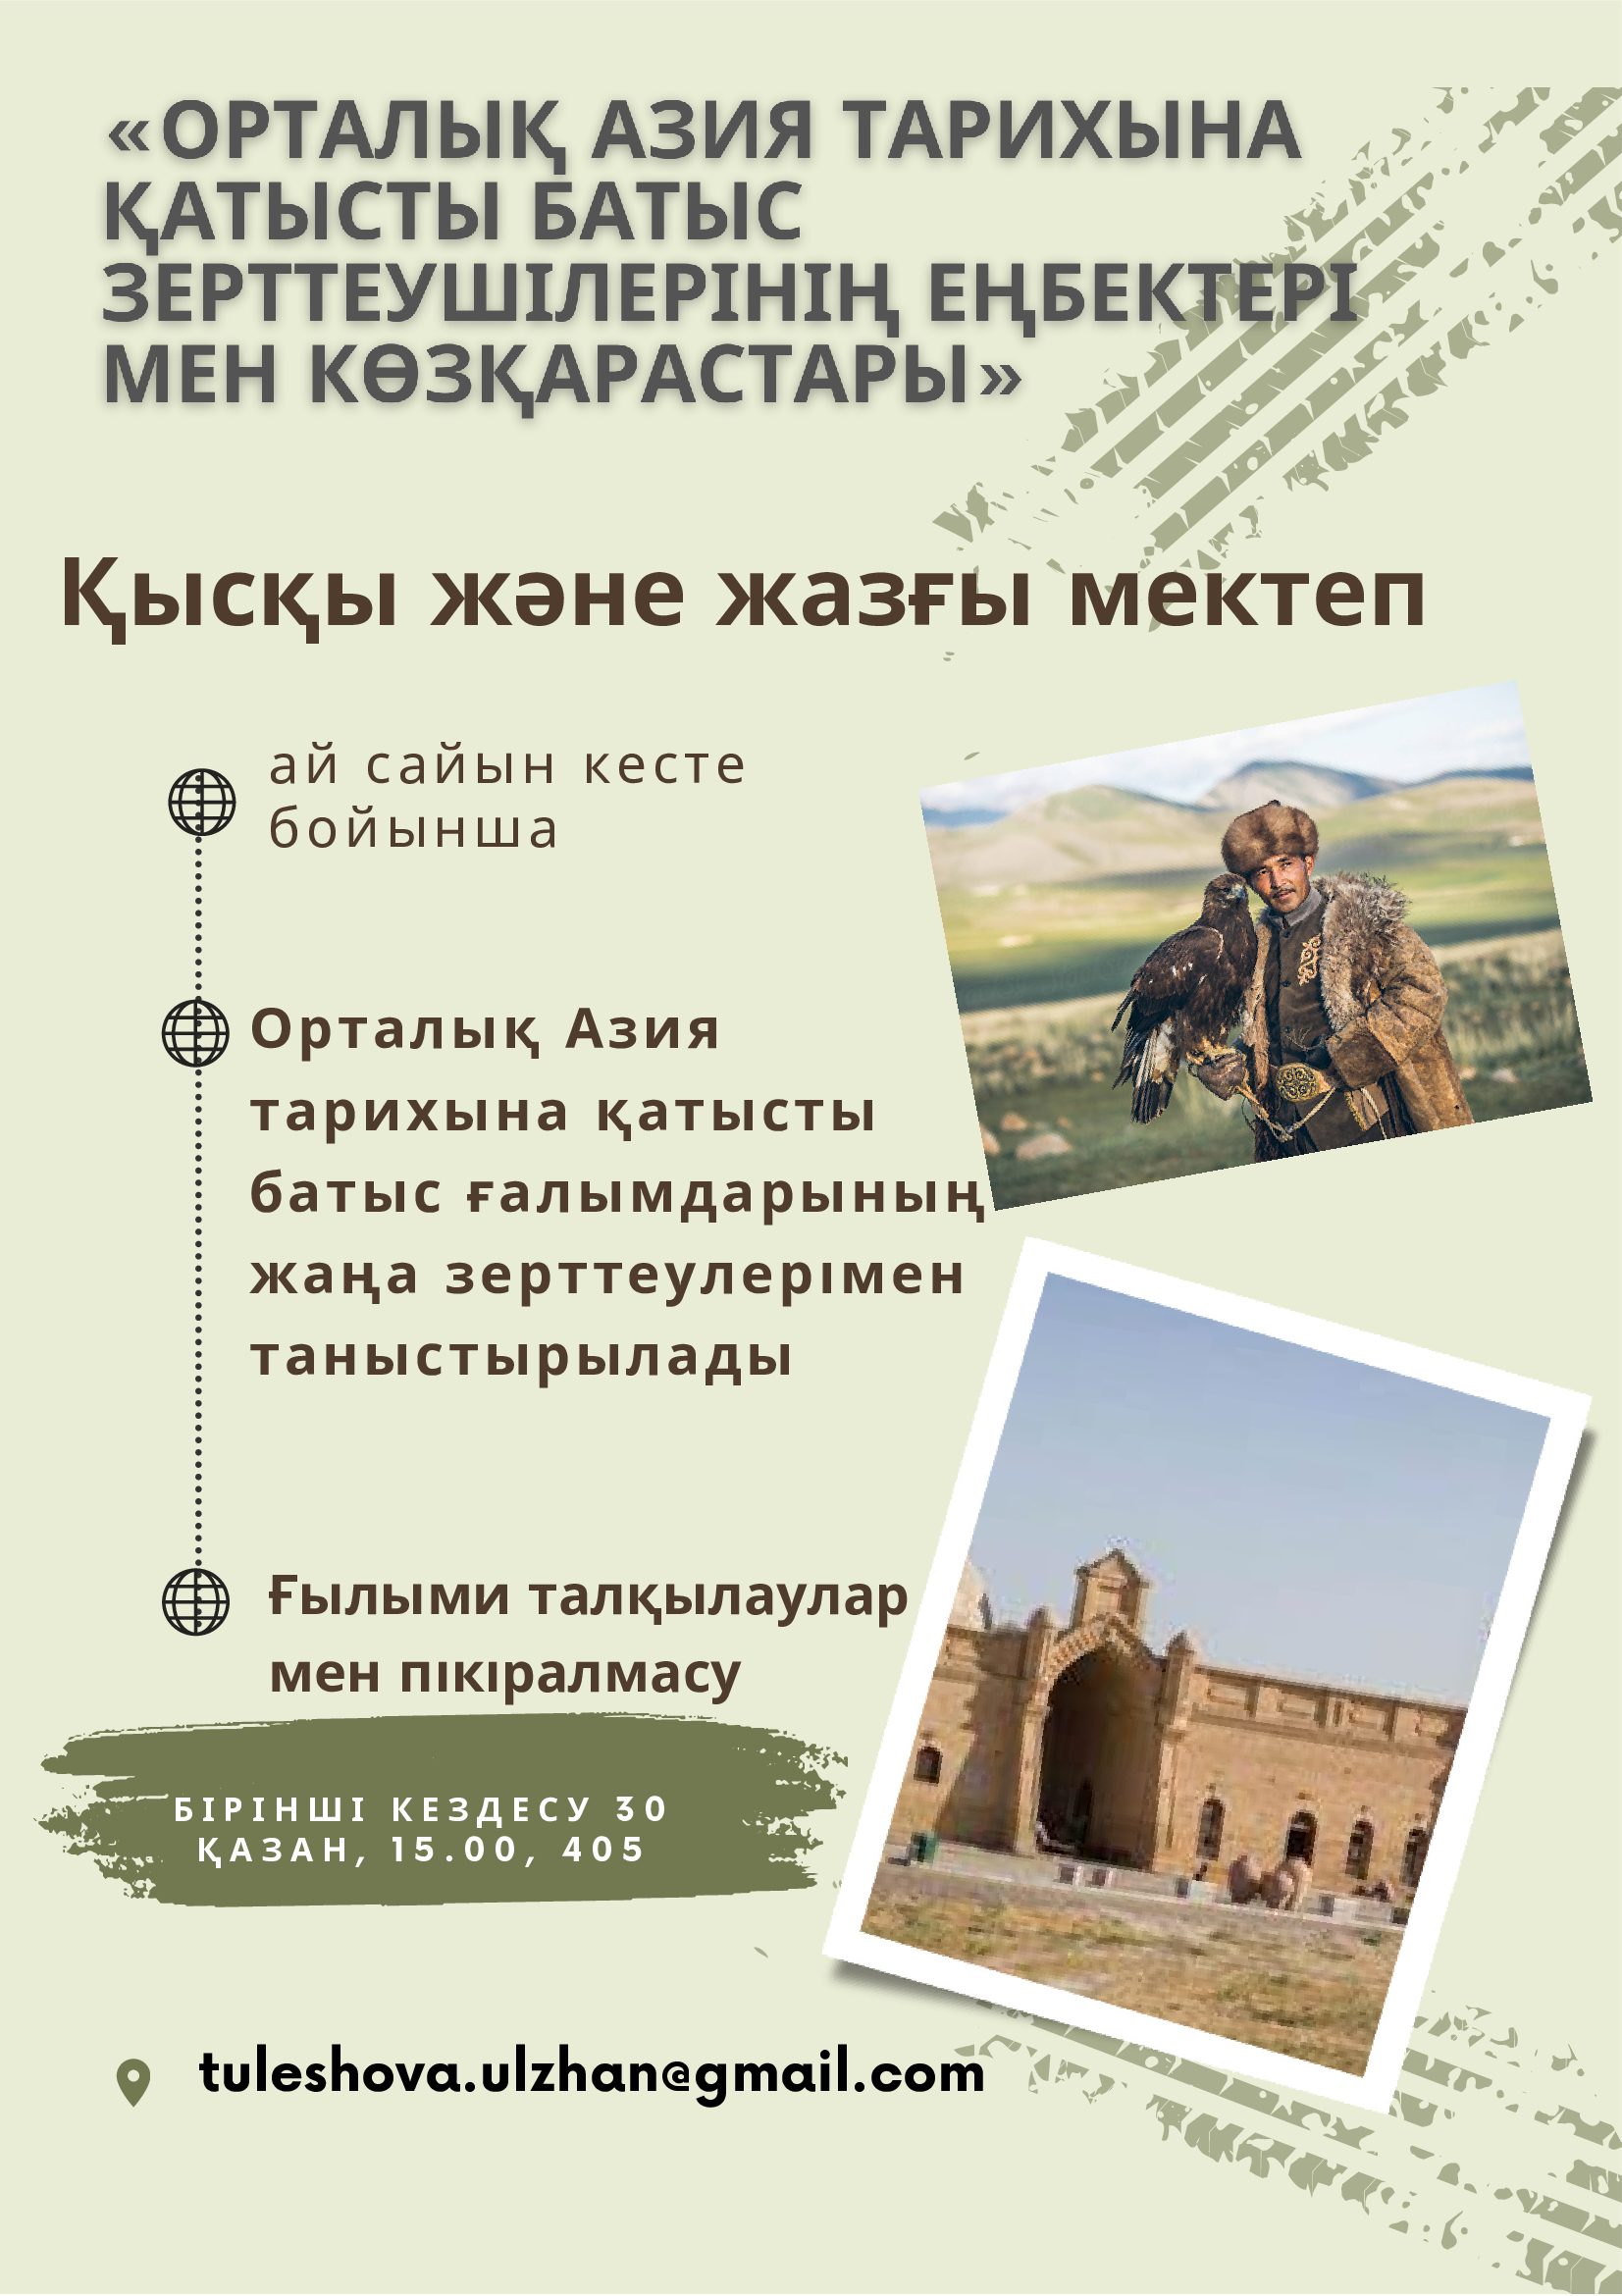 Works and views of Western researchers on the history of Central Asia